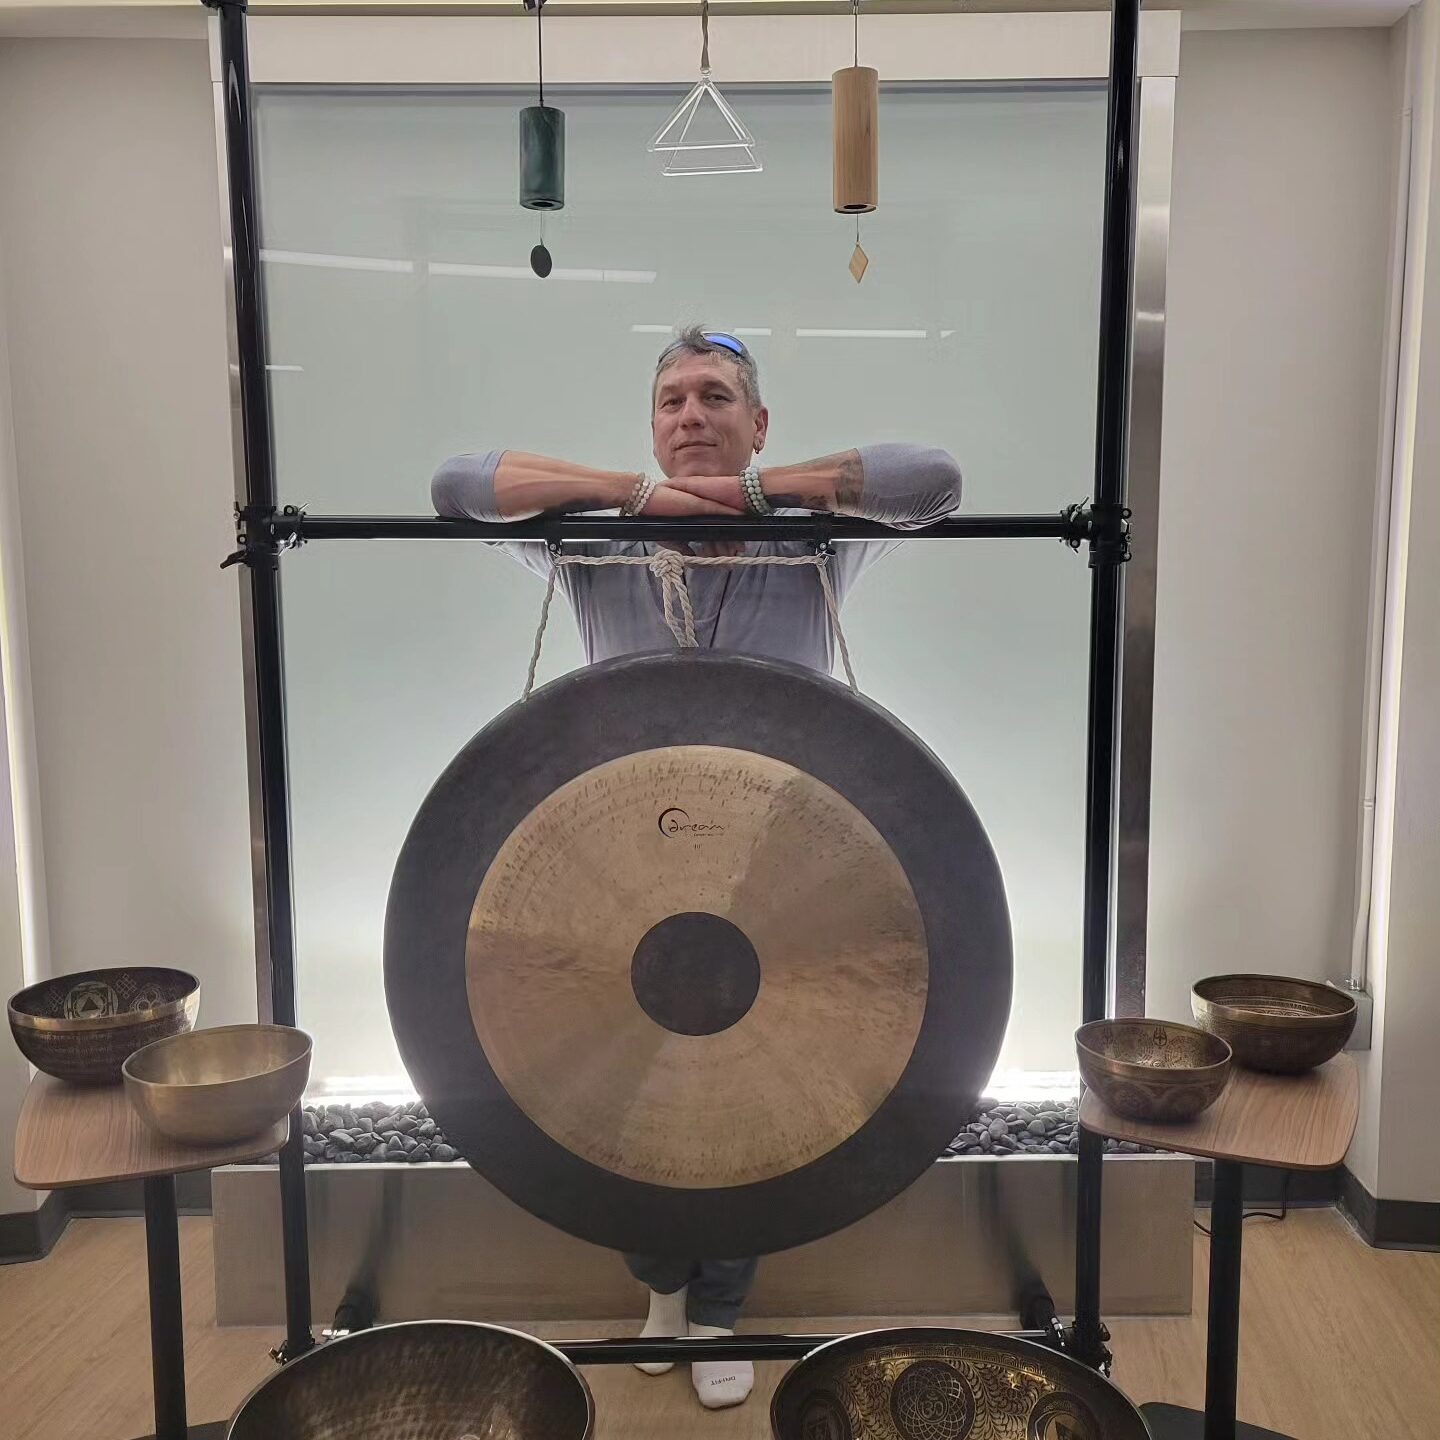 John Standingready Profile and Gong